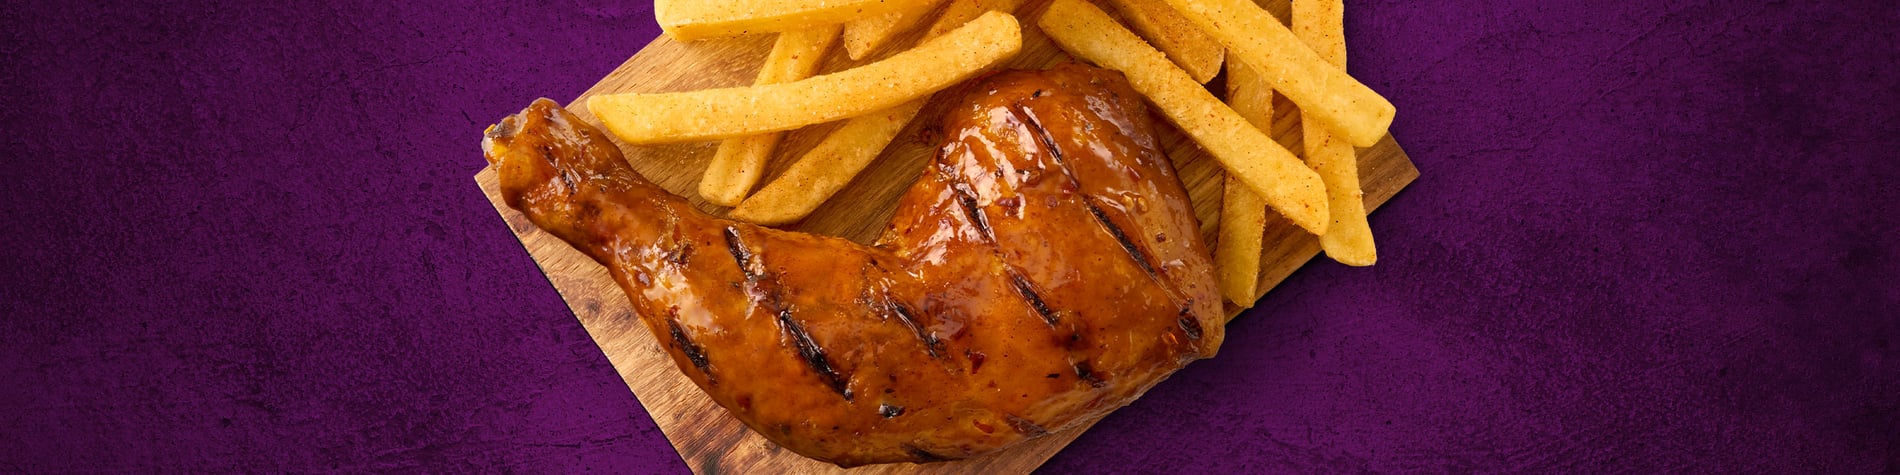 New Quarter Chicken Meal from Steers® on a wooden board placed on a grey surface with a purple background.